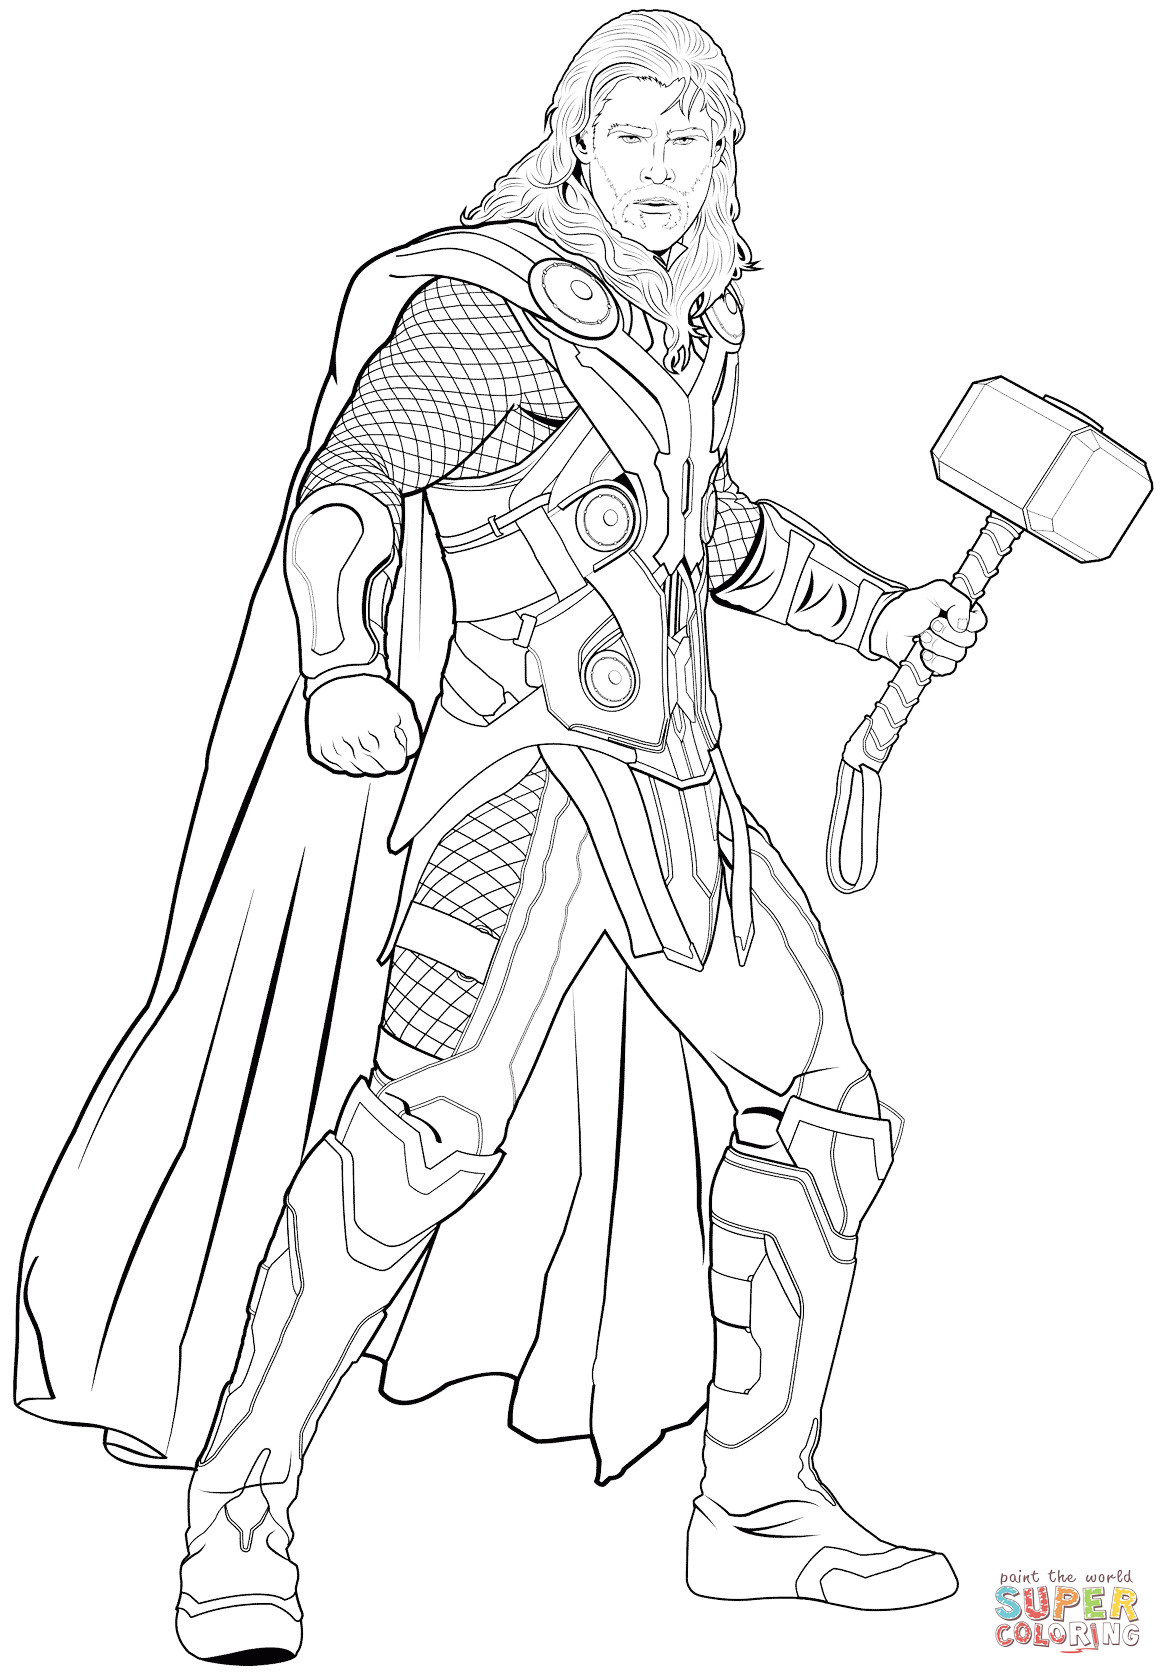 Printable Avengers Coloring Pages
 Avengers Thor coloring page